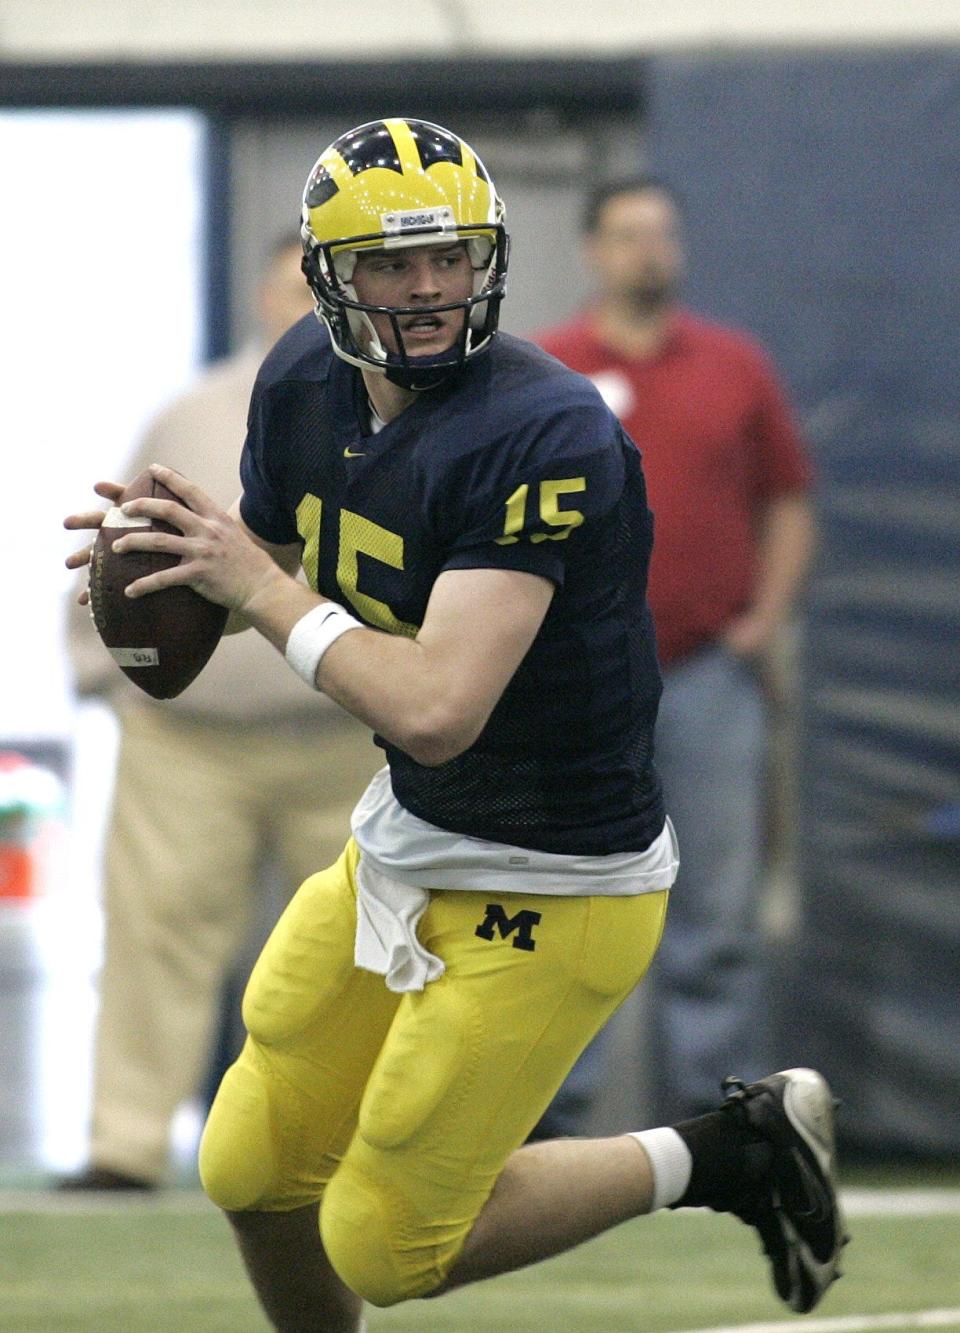 Michigan quarterback Ryan Mallett runs with the football during a spring practice session on Saturday, March 17, 2007, in Ann Arbor.